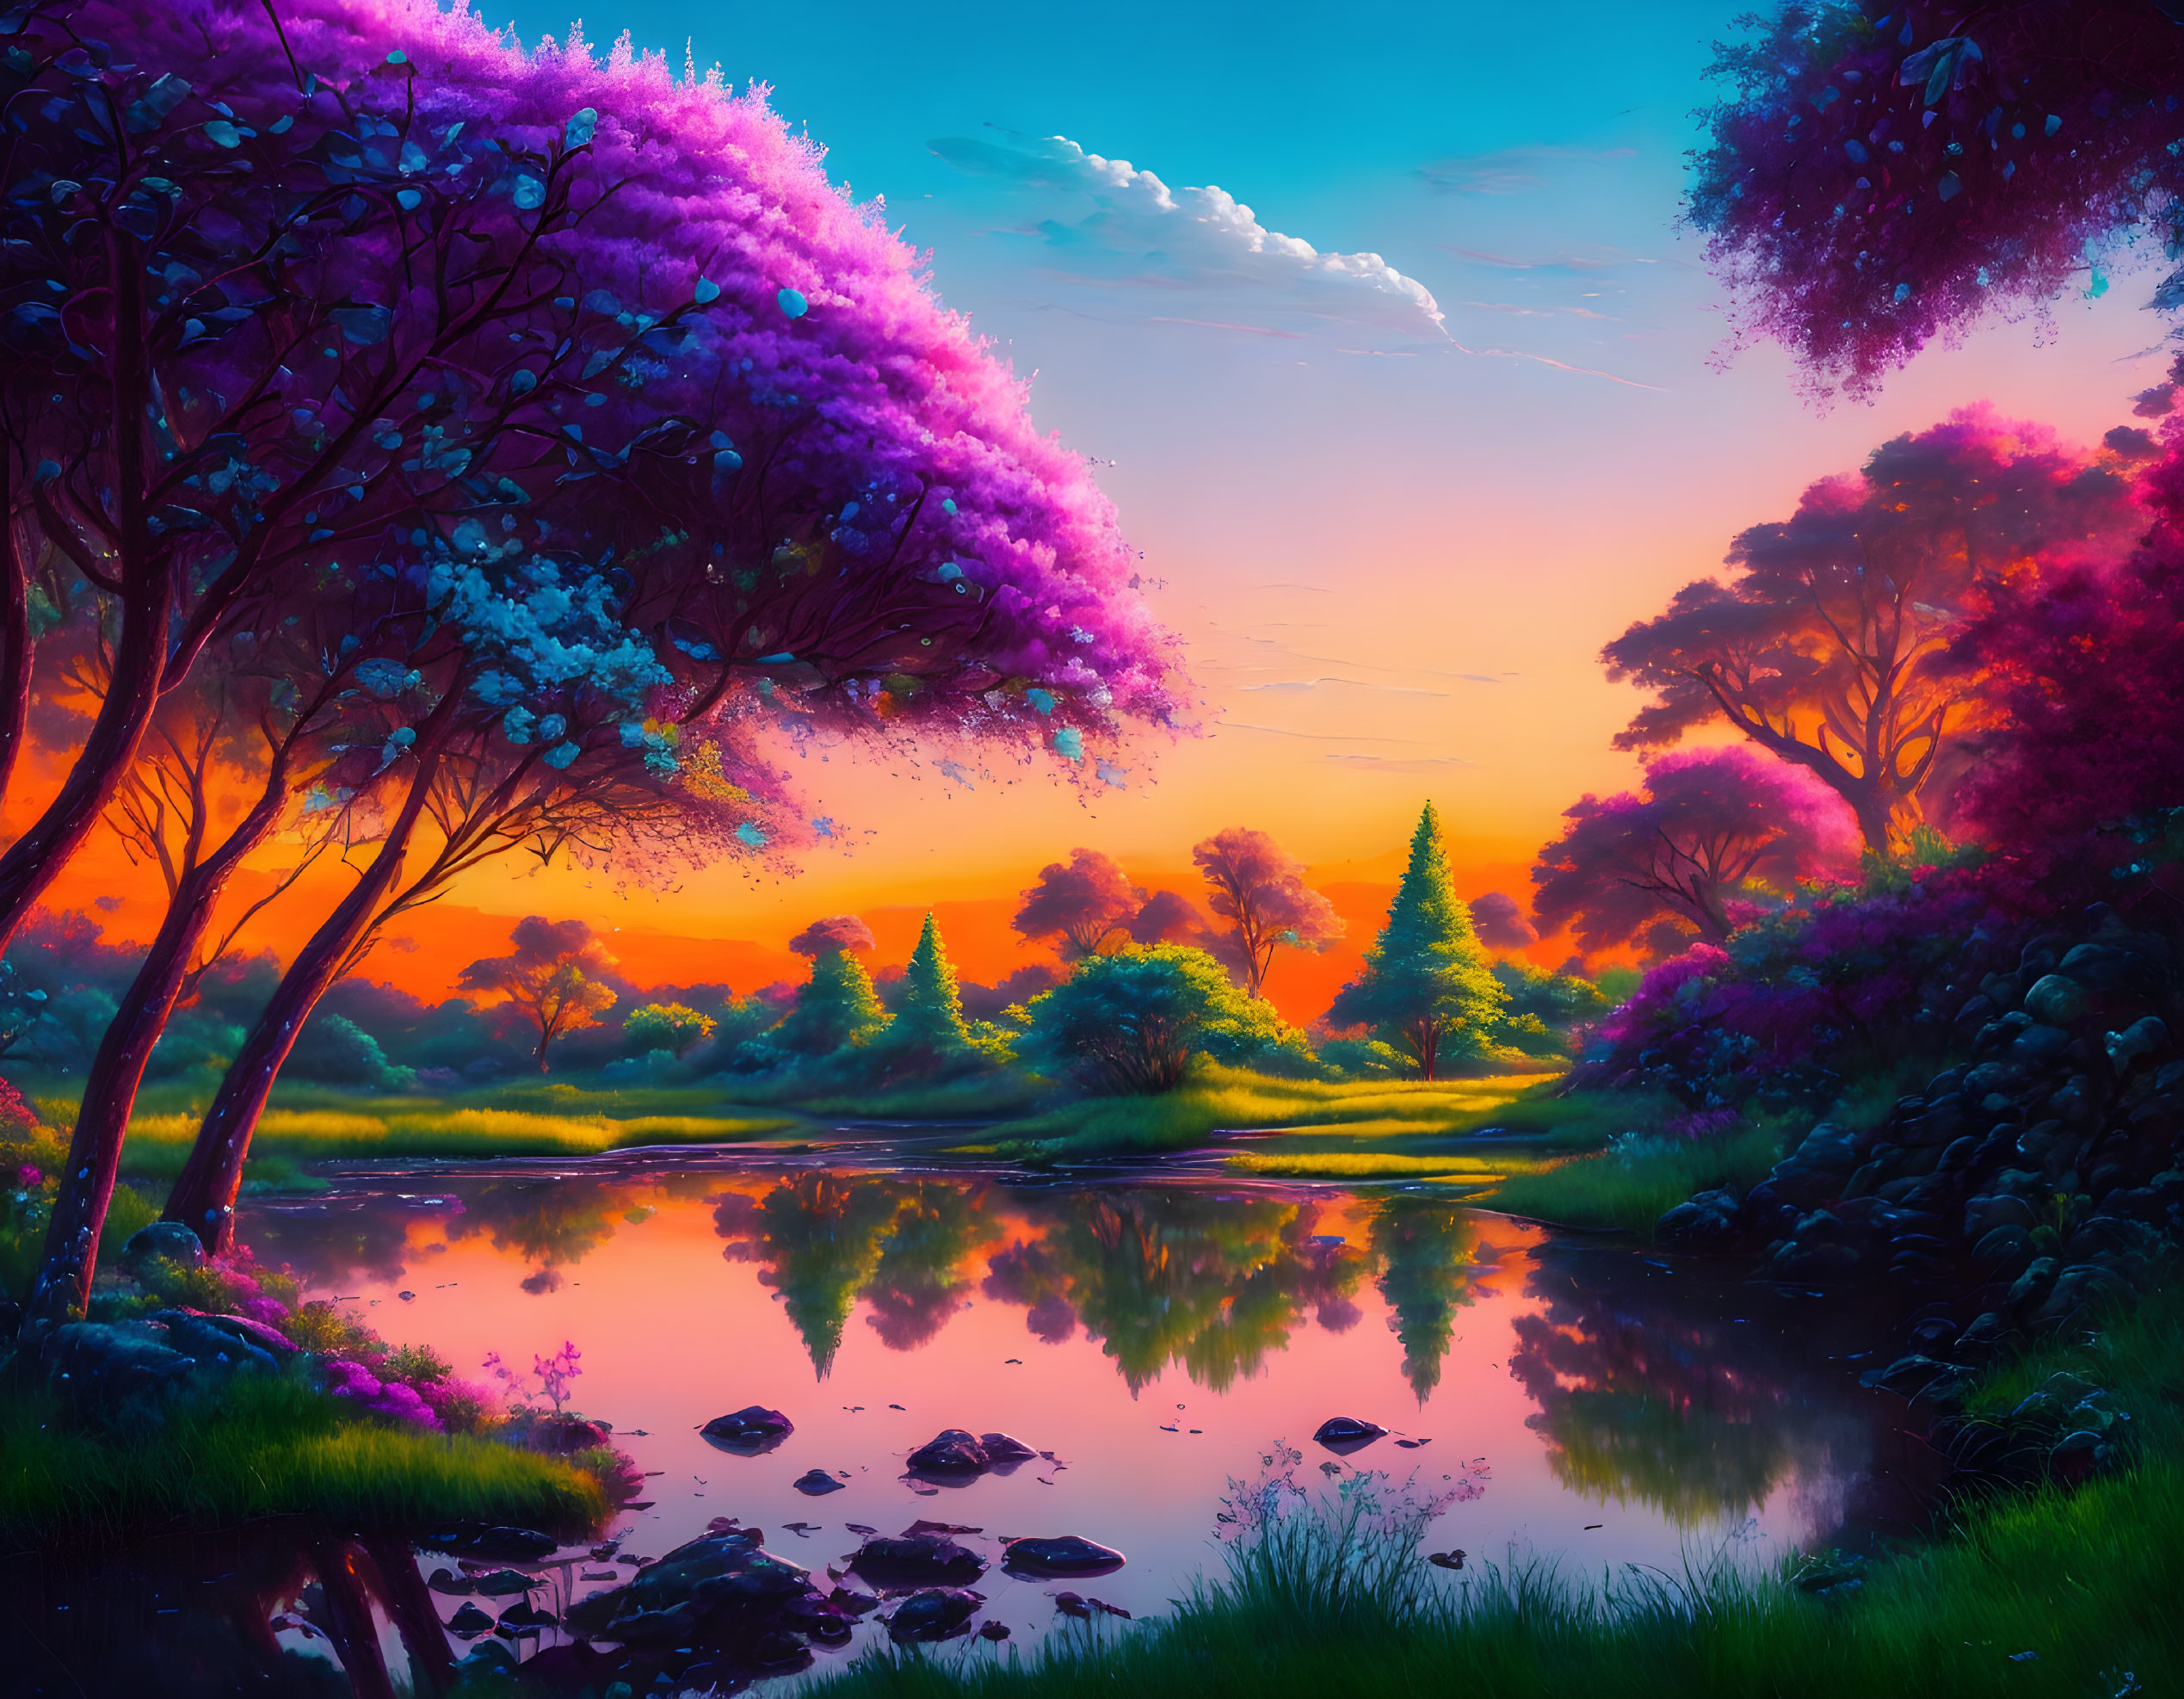 Colorful sunset landscape with purple and pink trees, a reflective river, and lush greenery under a